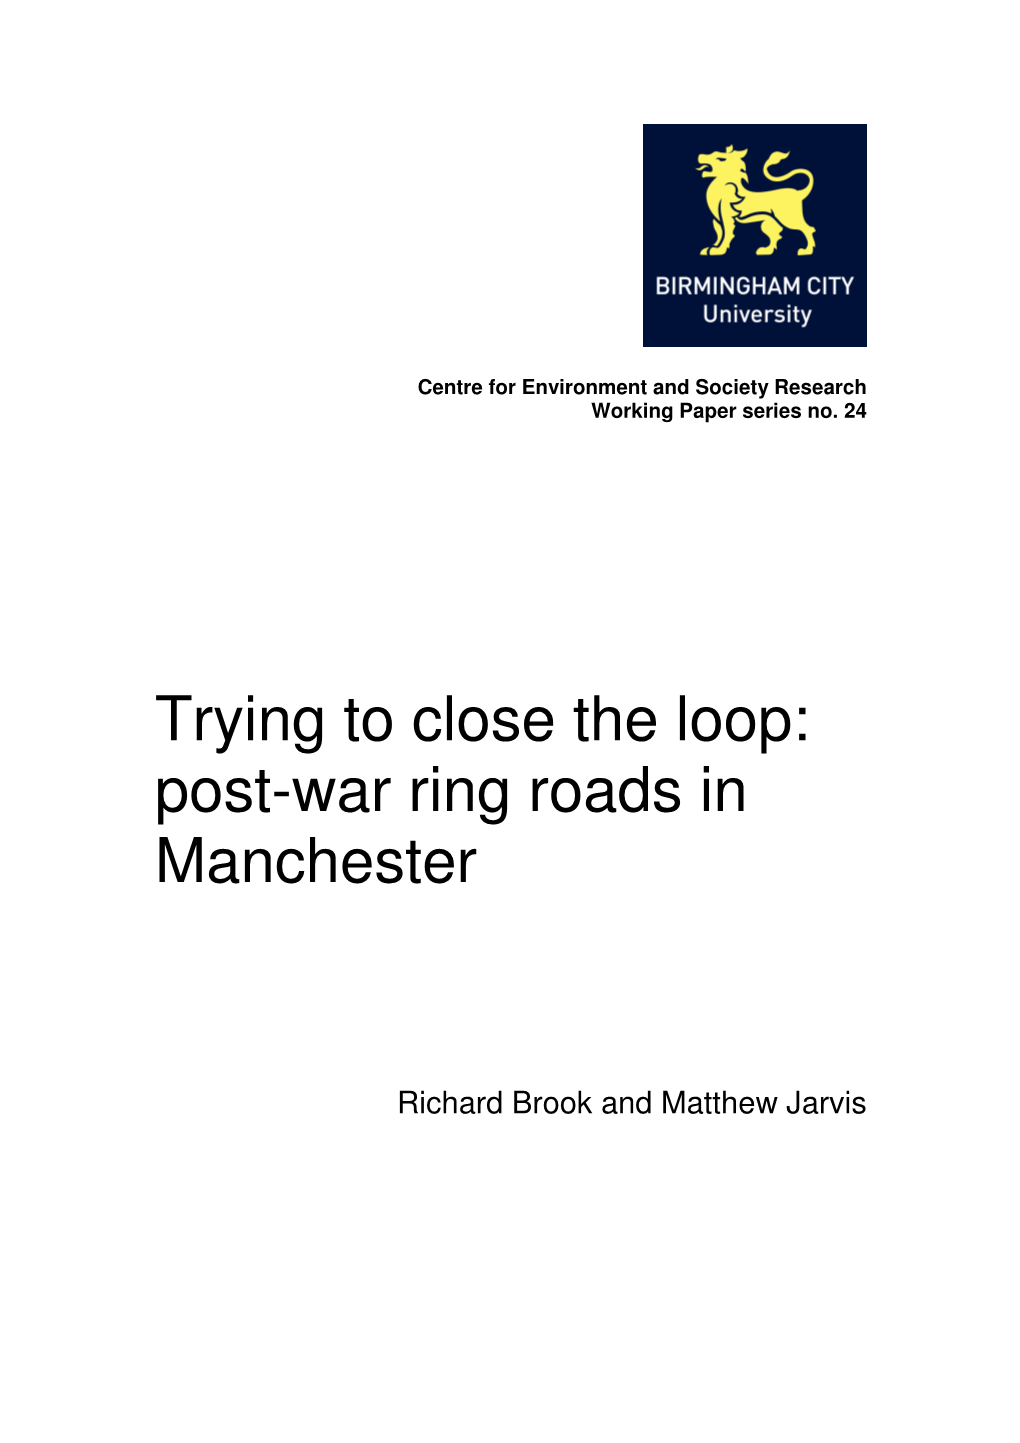 Trying to Close the Loop: Post-War Ring Roads in Manchester